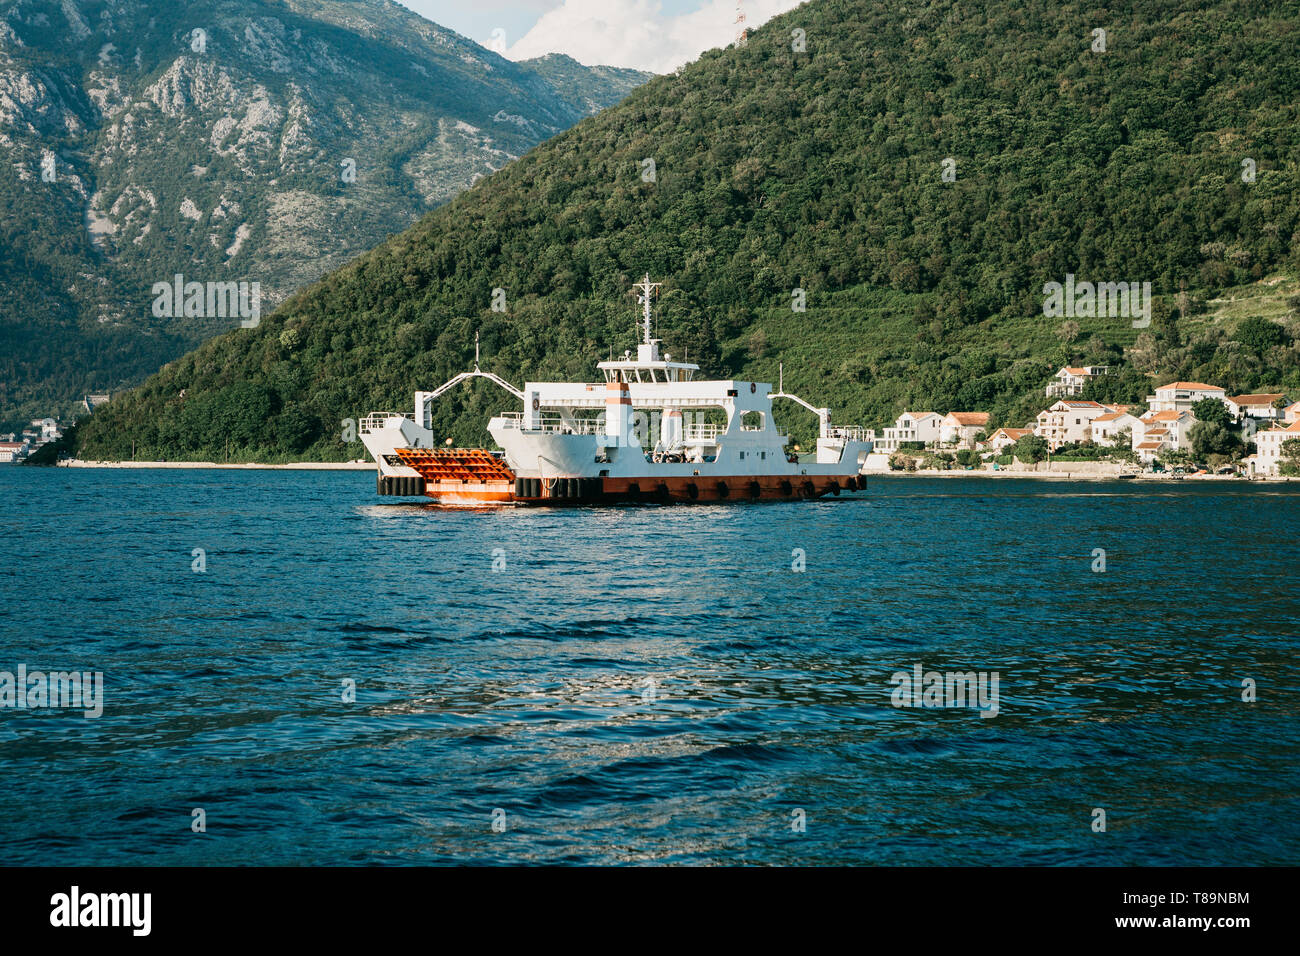 A ferry to transport vehicles and people crosses the bay in Montenegro and approaches the city. Stock Photo